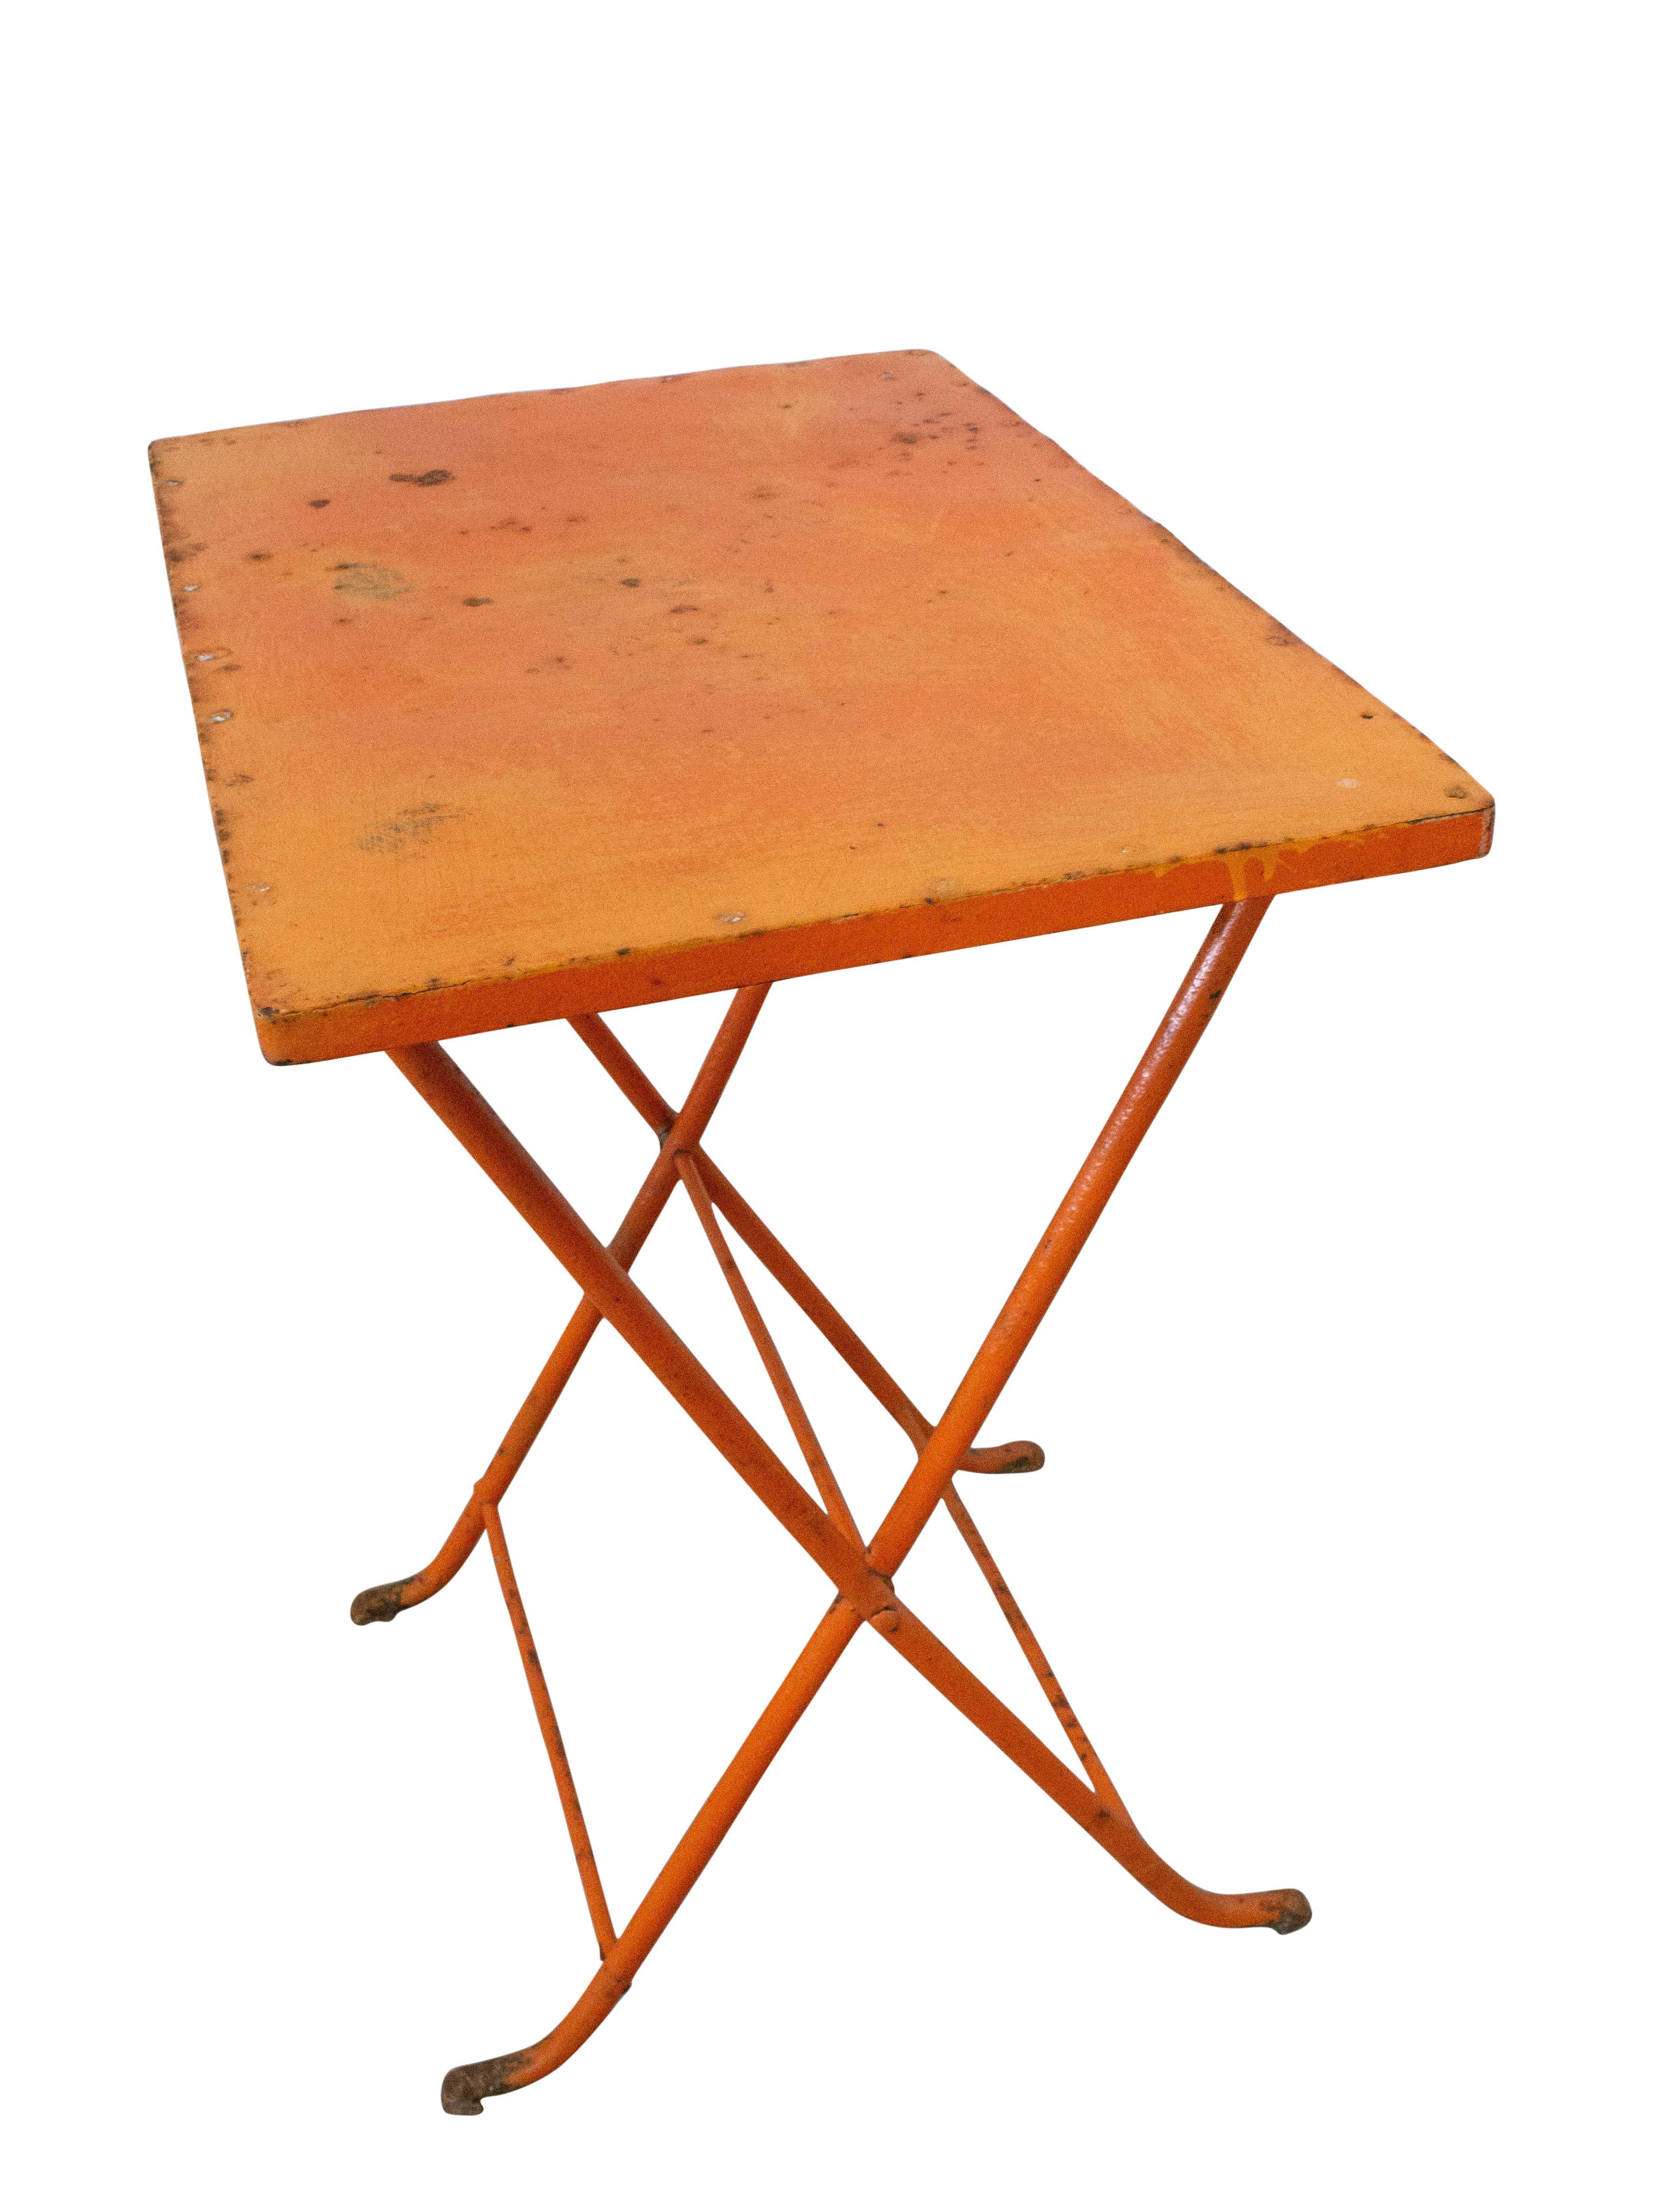 Folding table Metal midcentury circa 1960 side table for garden, patio or balcony
This can also be used as a side table in your interior
Folded measures depth 20 cm width 65 cm height 87 cm.
In good vintage condition with superb original